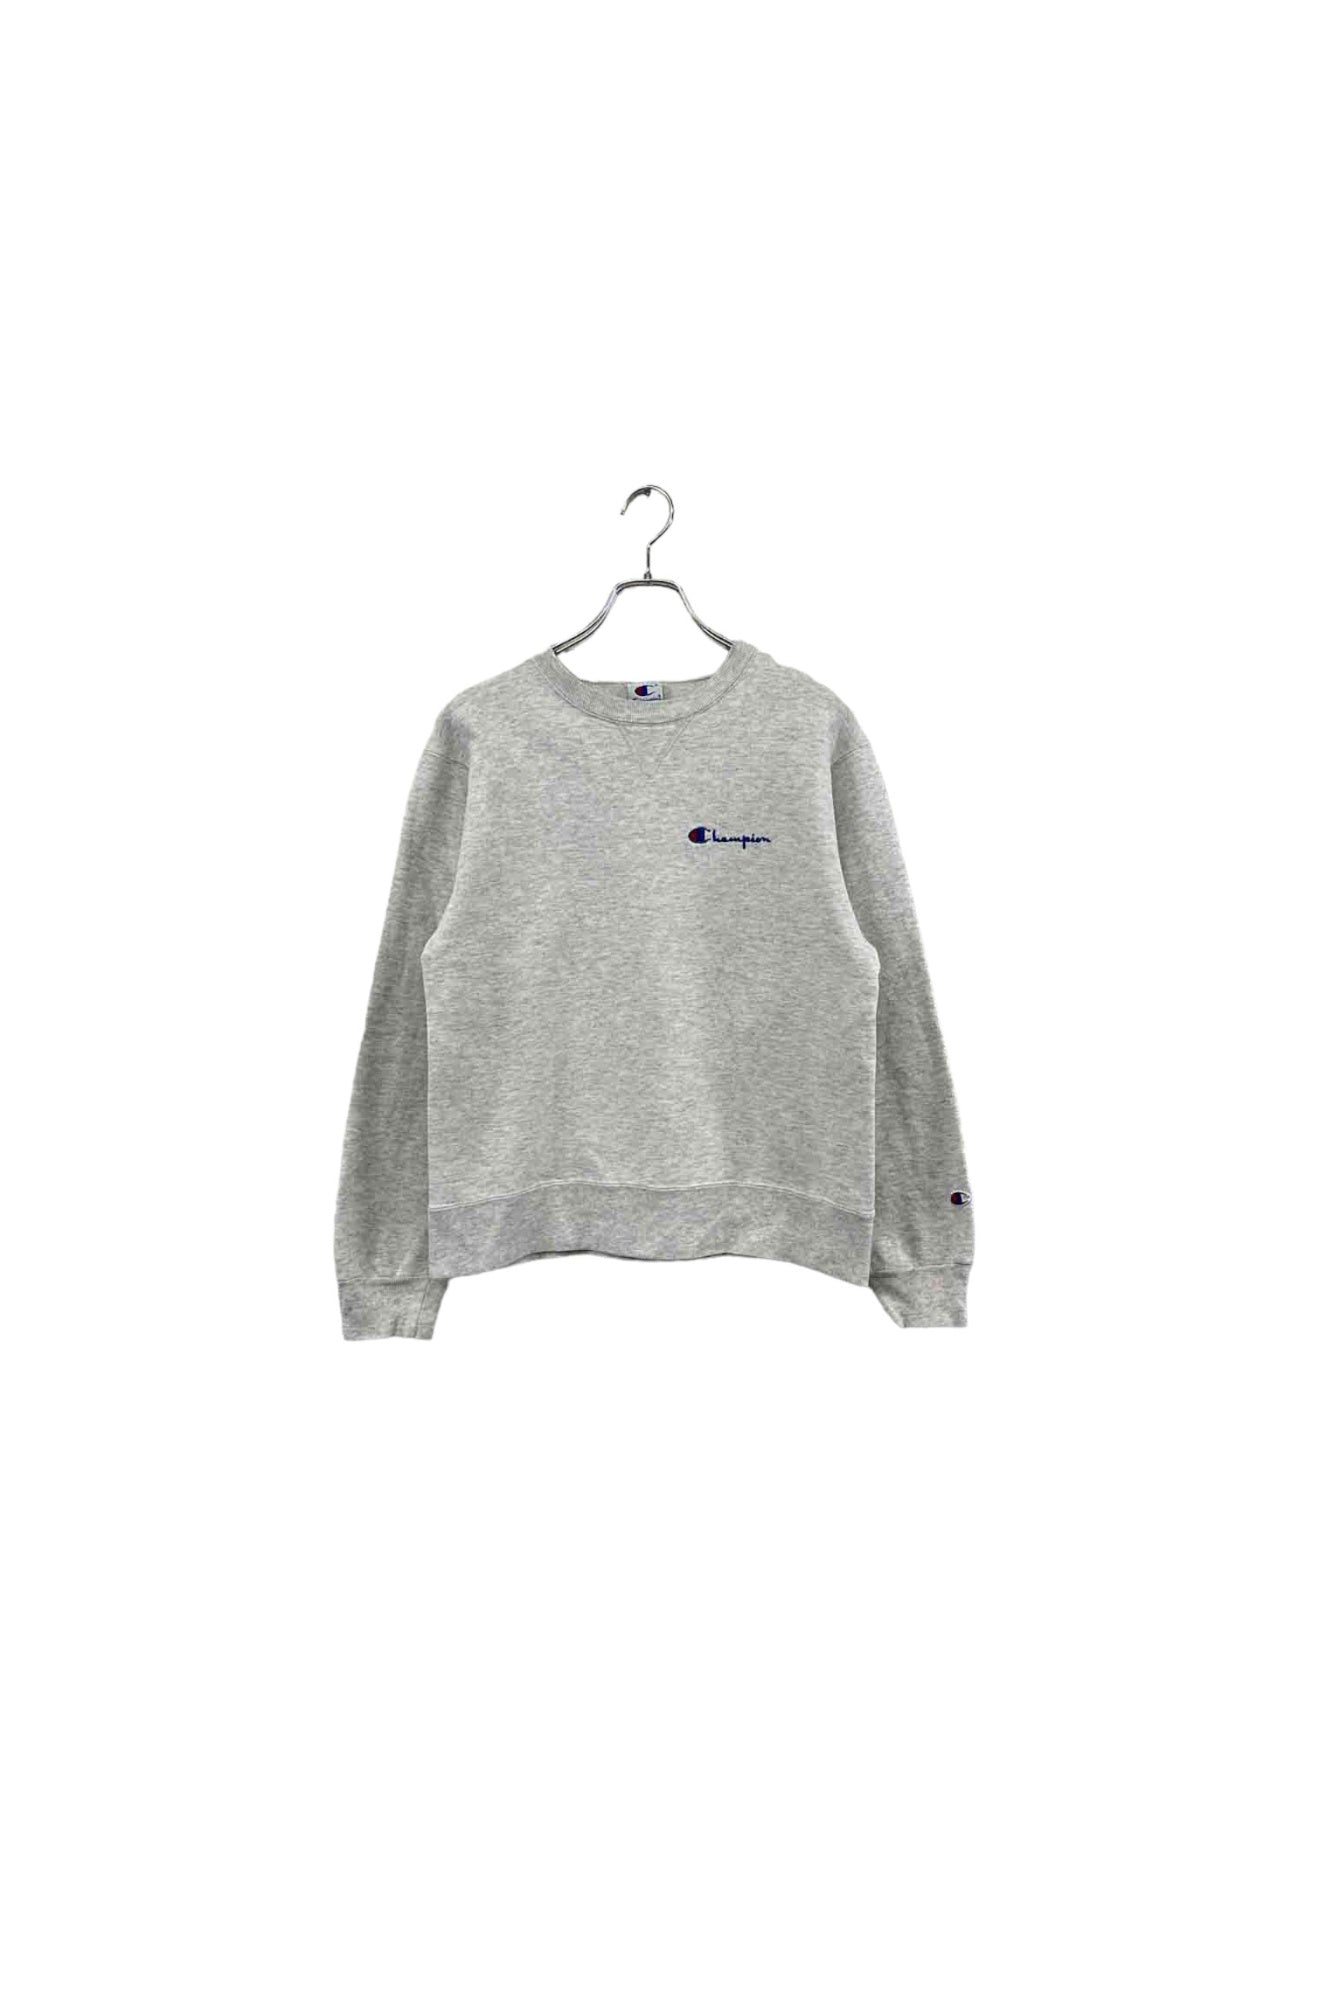 90's Made in USA Champion gray sweat